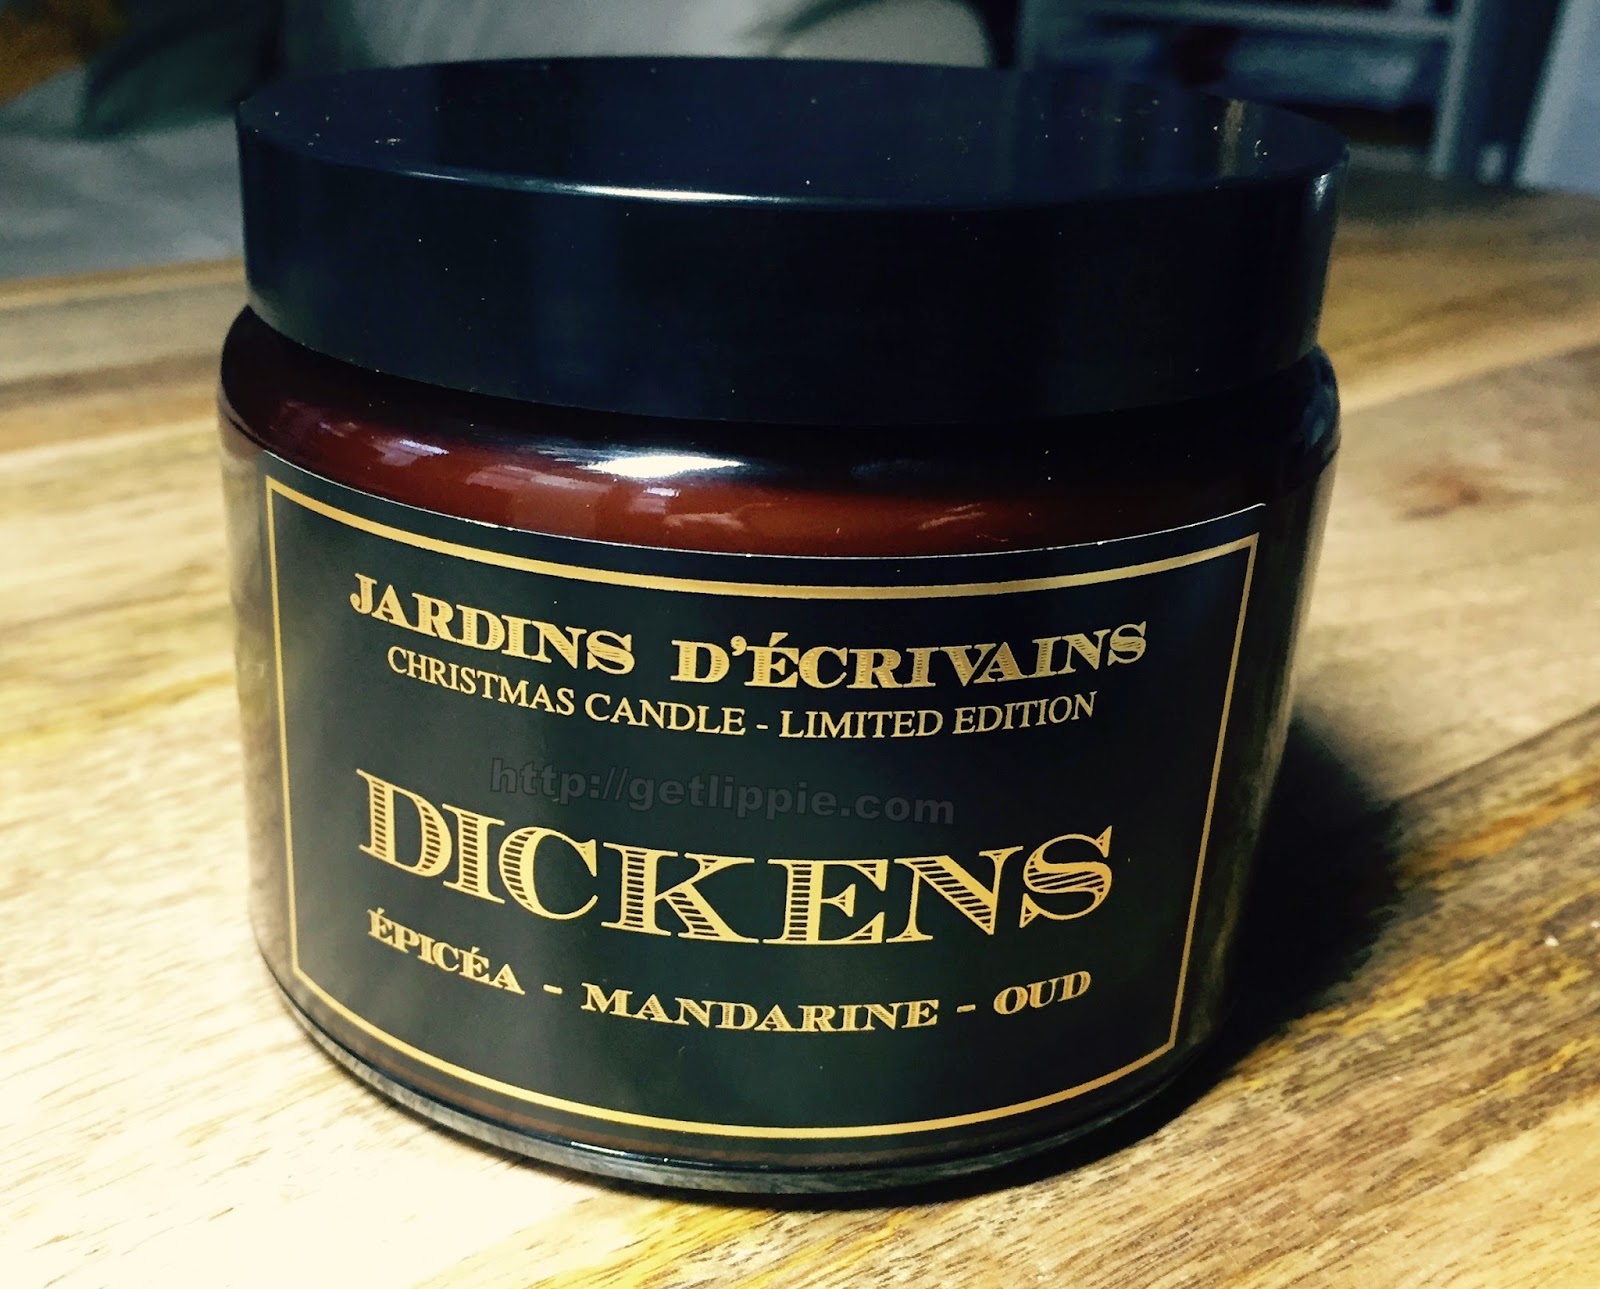 Jardins d'Ecrivains "Dickens" Christmas Candle